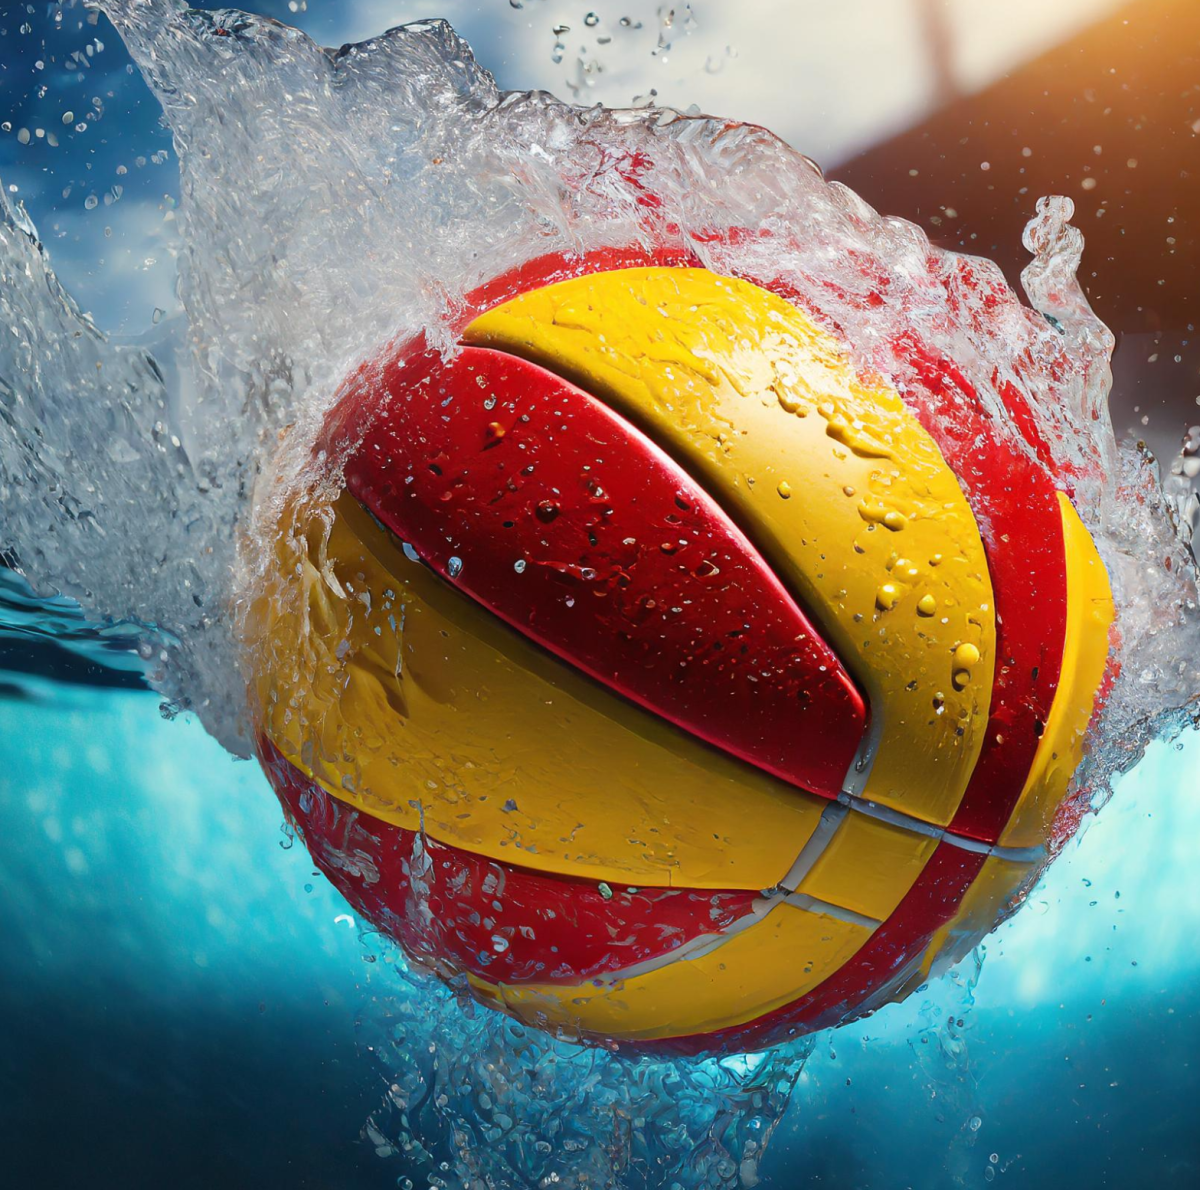 Girls water polo team cant get traction; goes under a third time in a 20-9 loss to Birmingham. | ADOBE FIREFLY